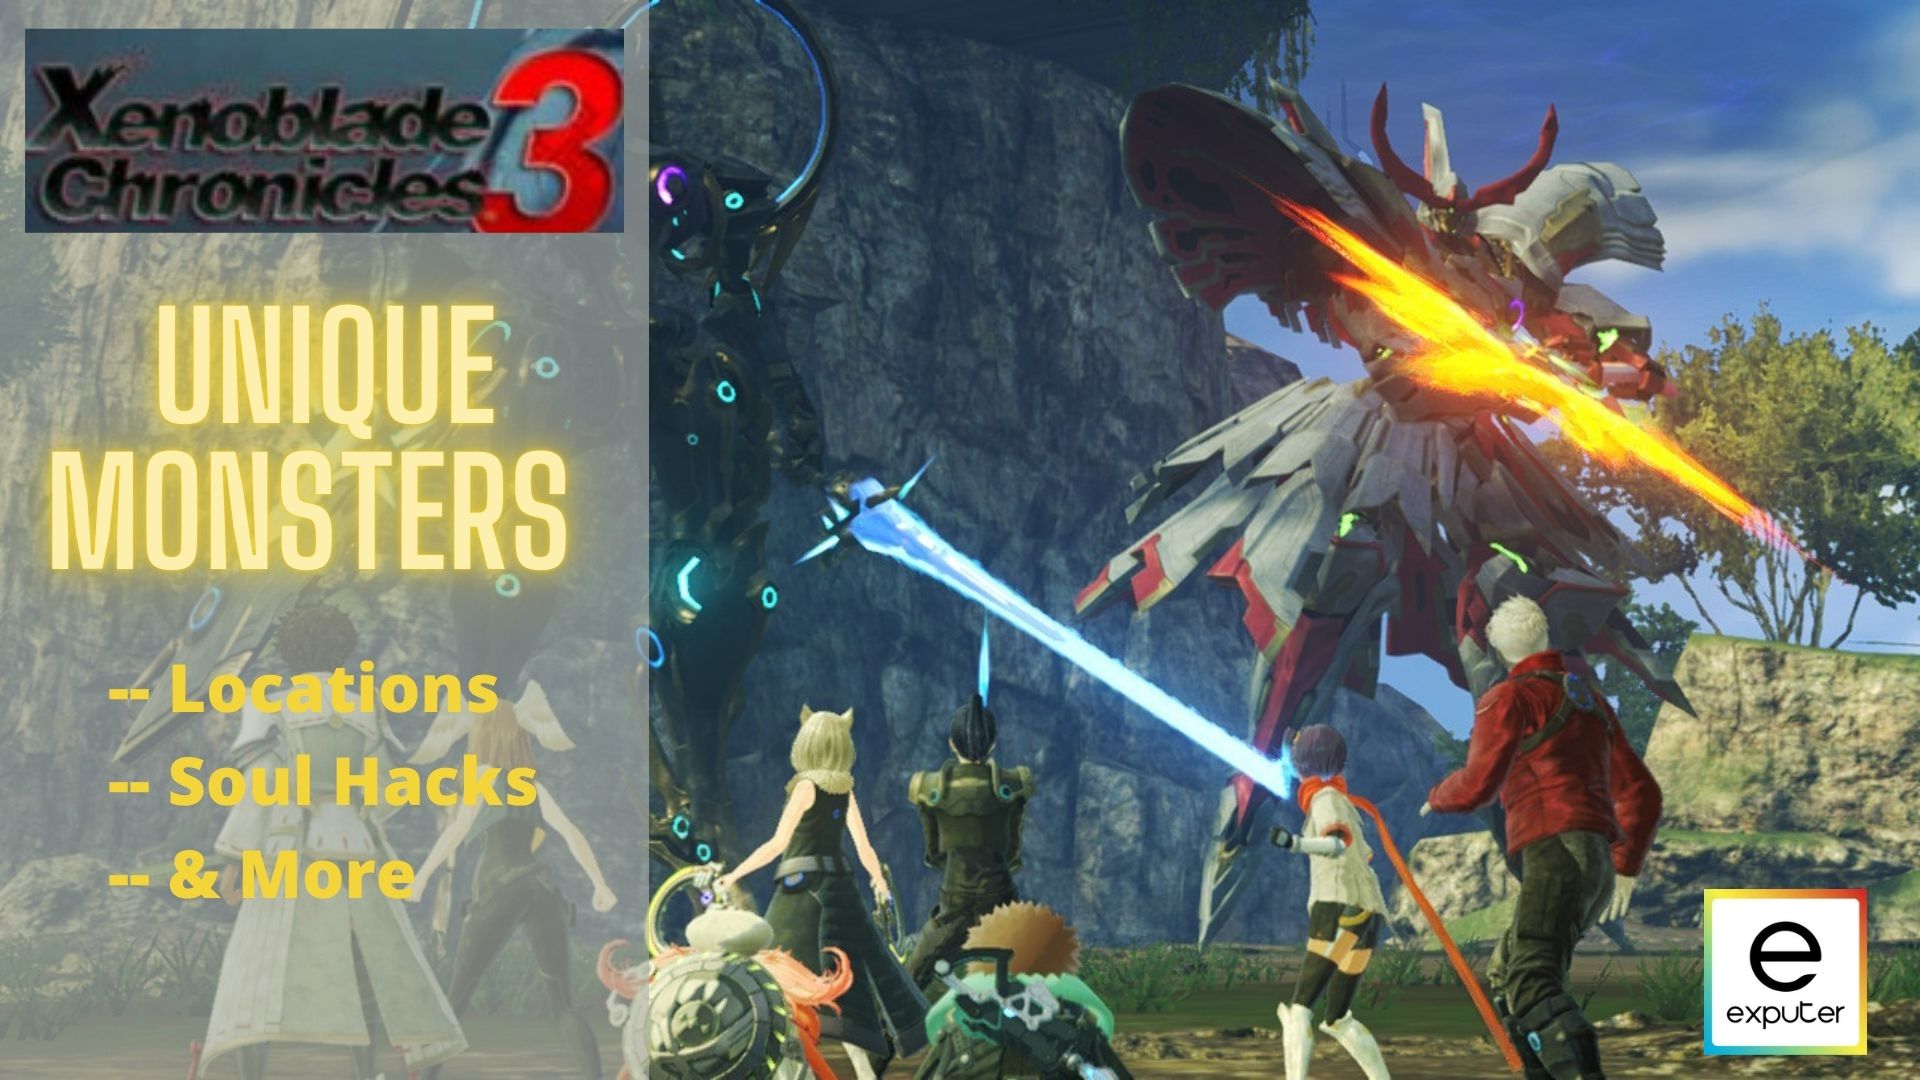 Unique Monsters Of Xenoblade Chronicles 3